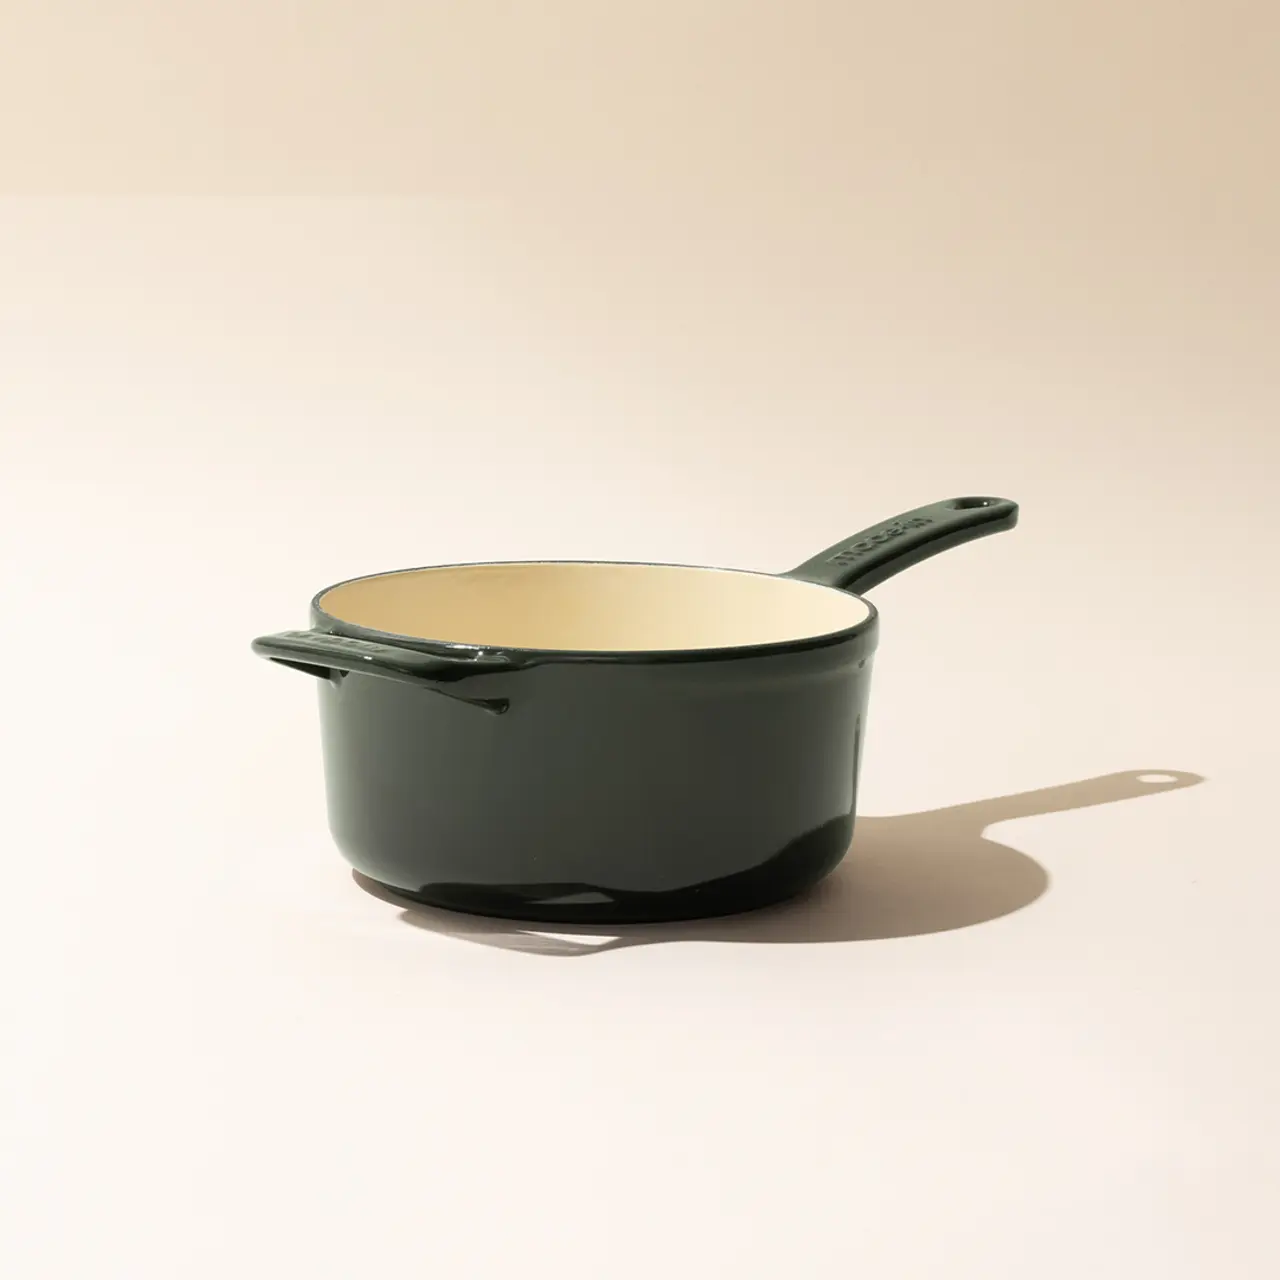 A dark green saucepan with a cream interior is centered on a neutral background, casting a soft shadow to the right.